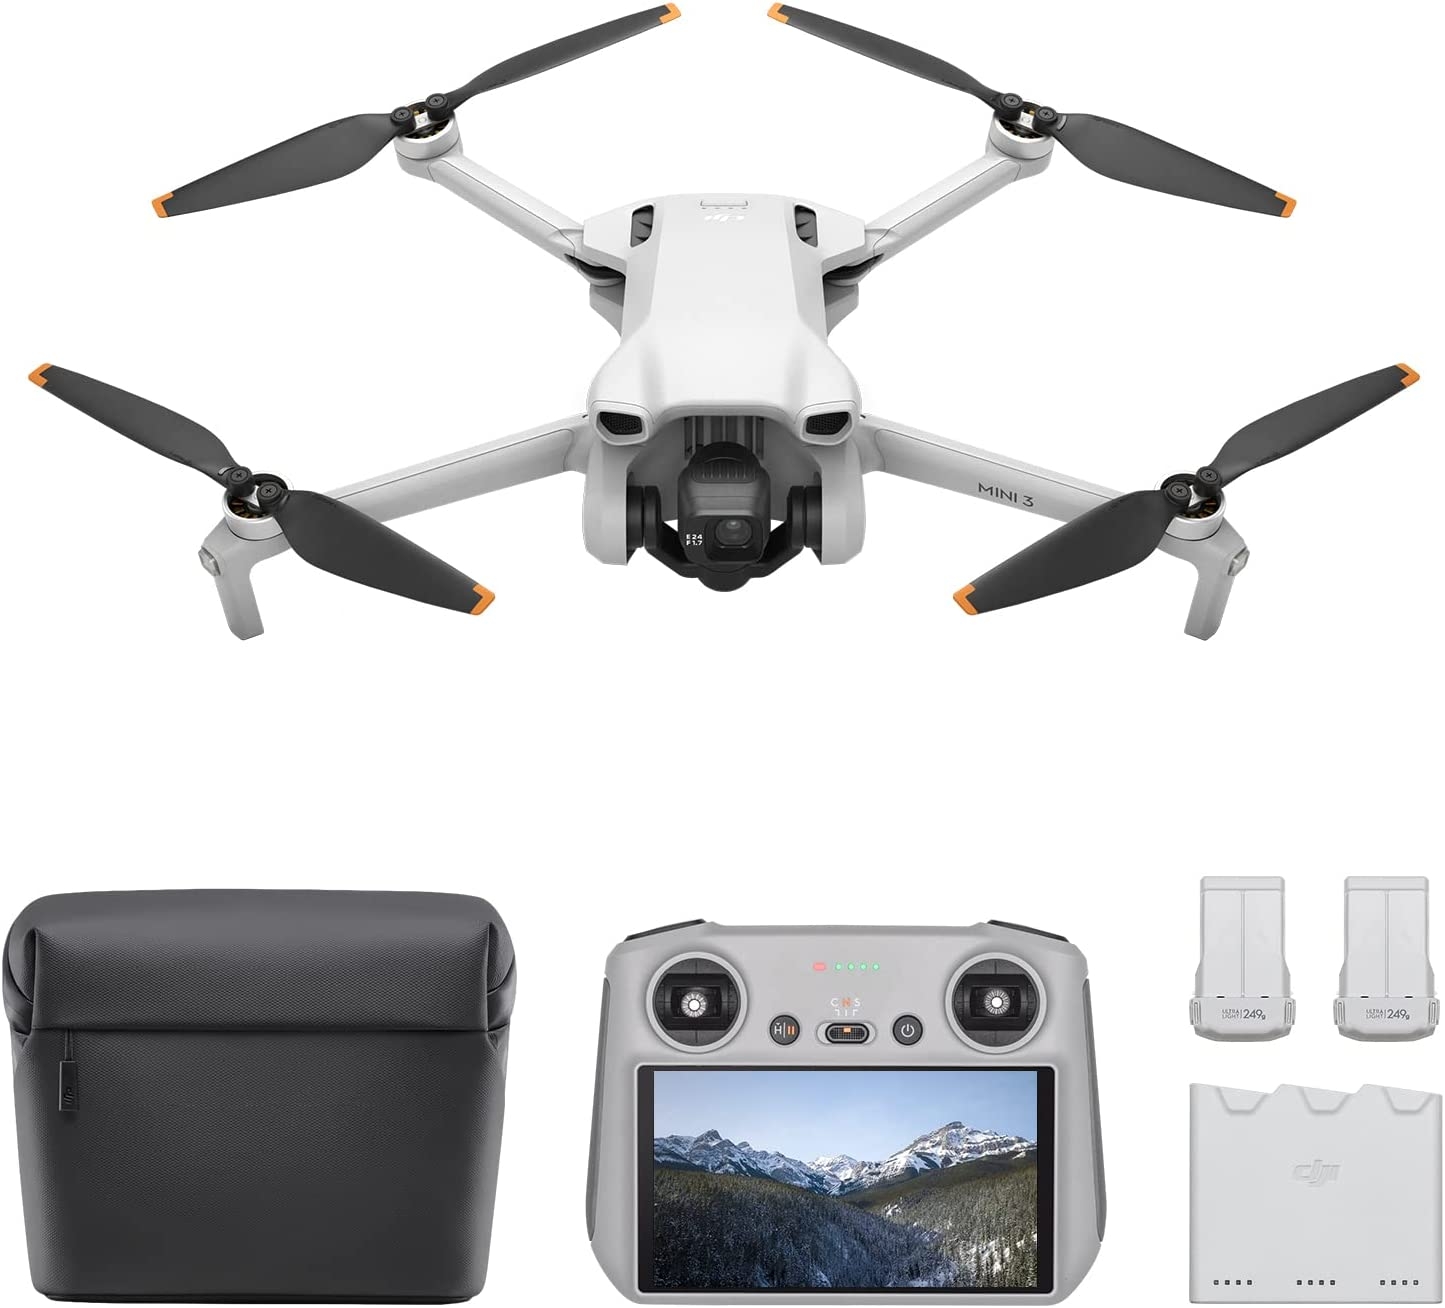 DJI Mini 3 – Lightweight and foldable mini camera drone with 4K HDR video, 38 min flight time, real vertical shots and